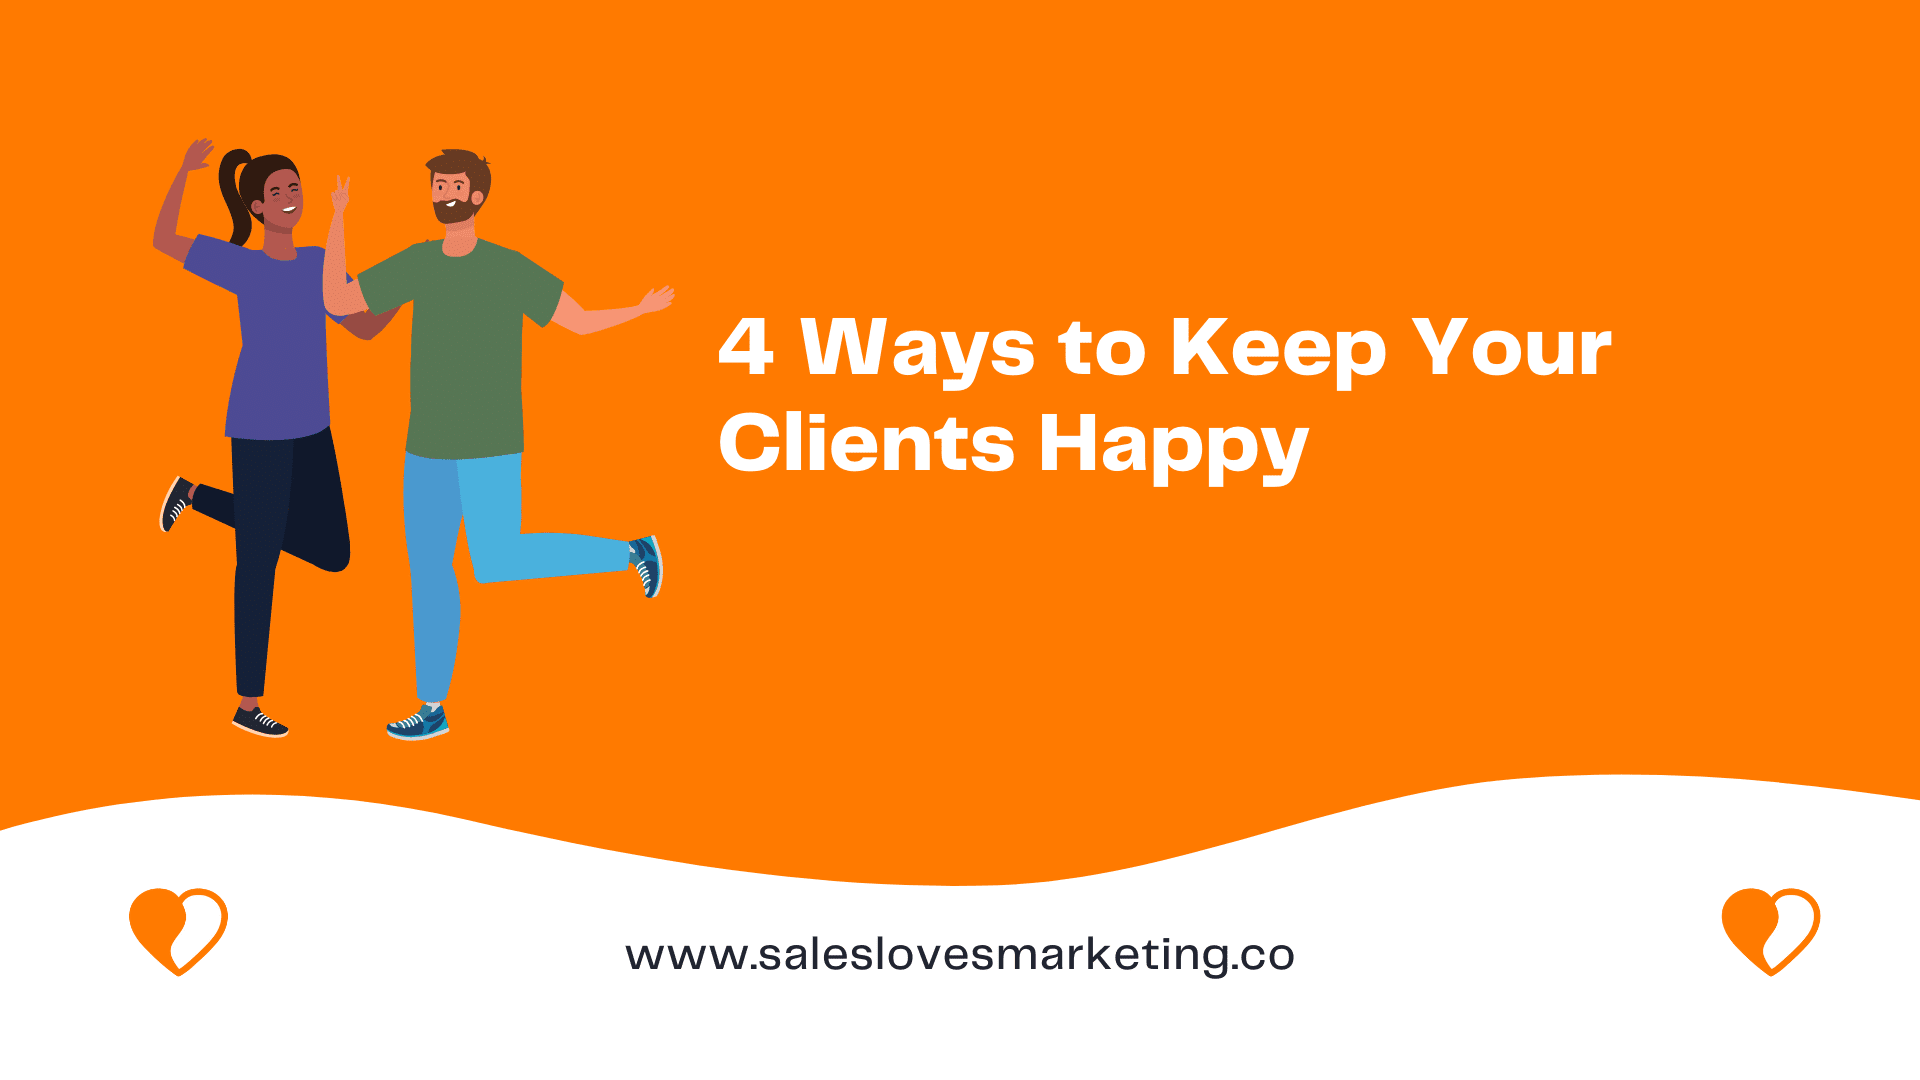 Expert Advice: 4 Ways to Keep Your Clients Happy